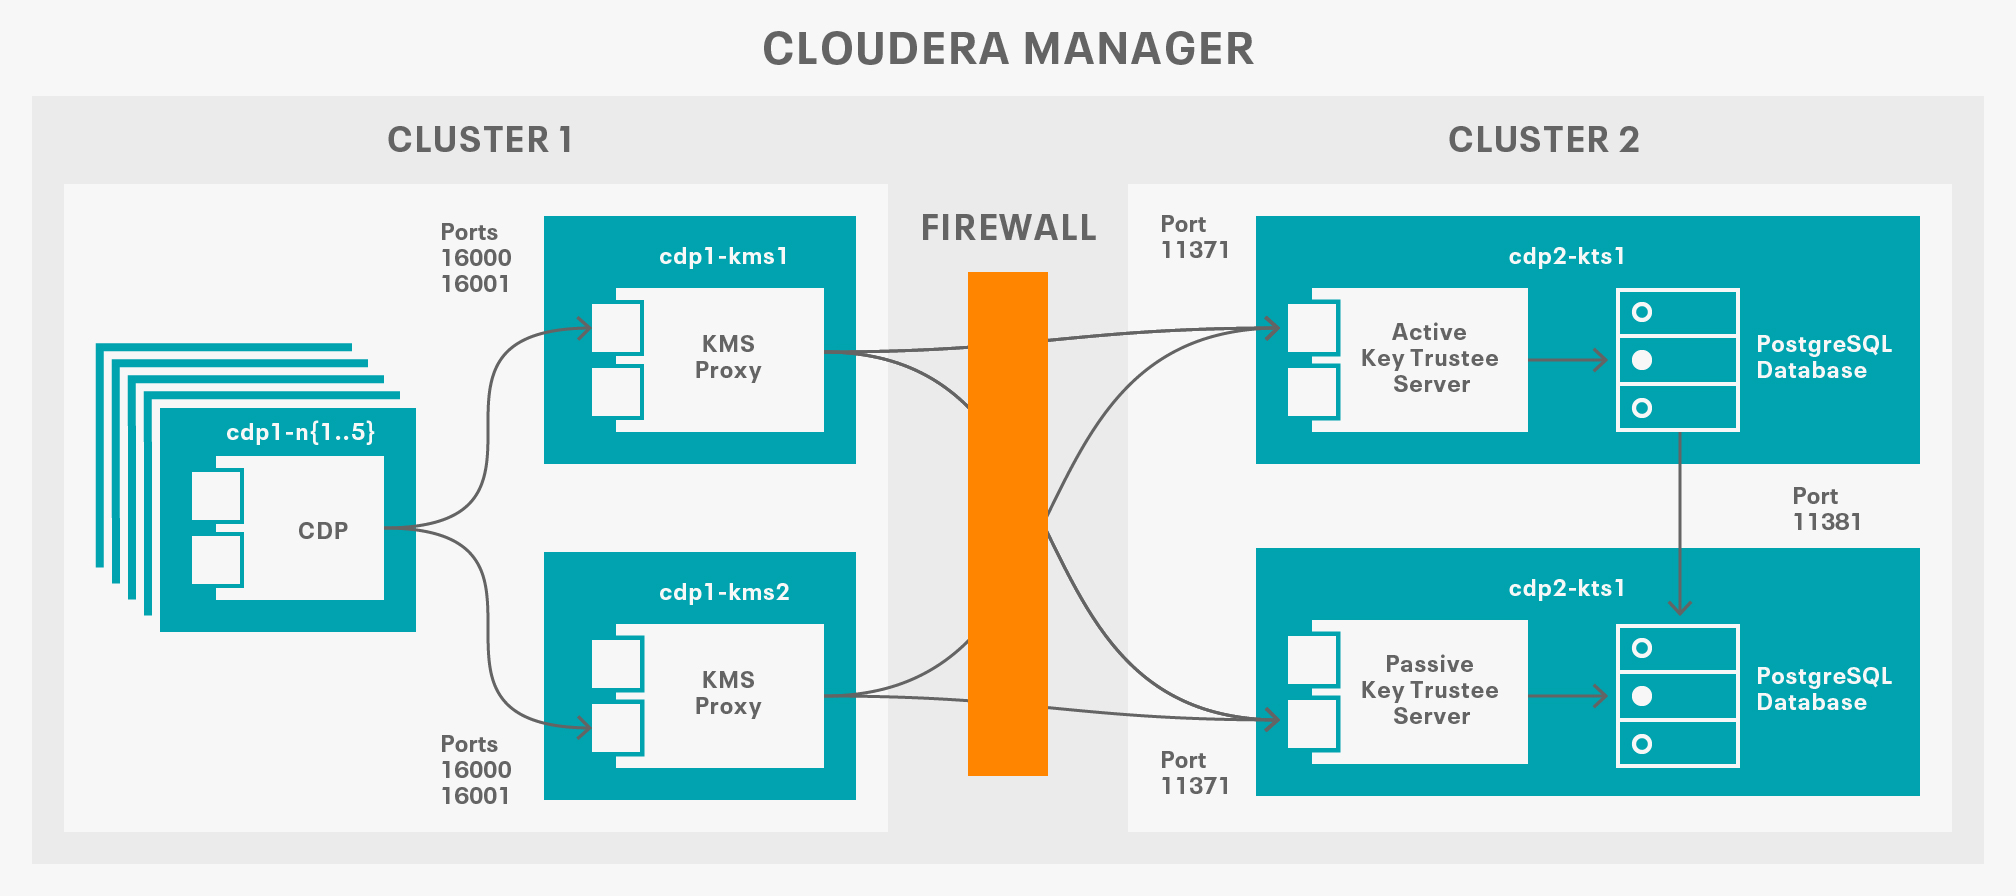 Cloudera Managerの理論アーキテクチャ図